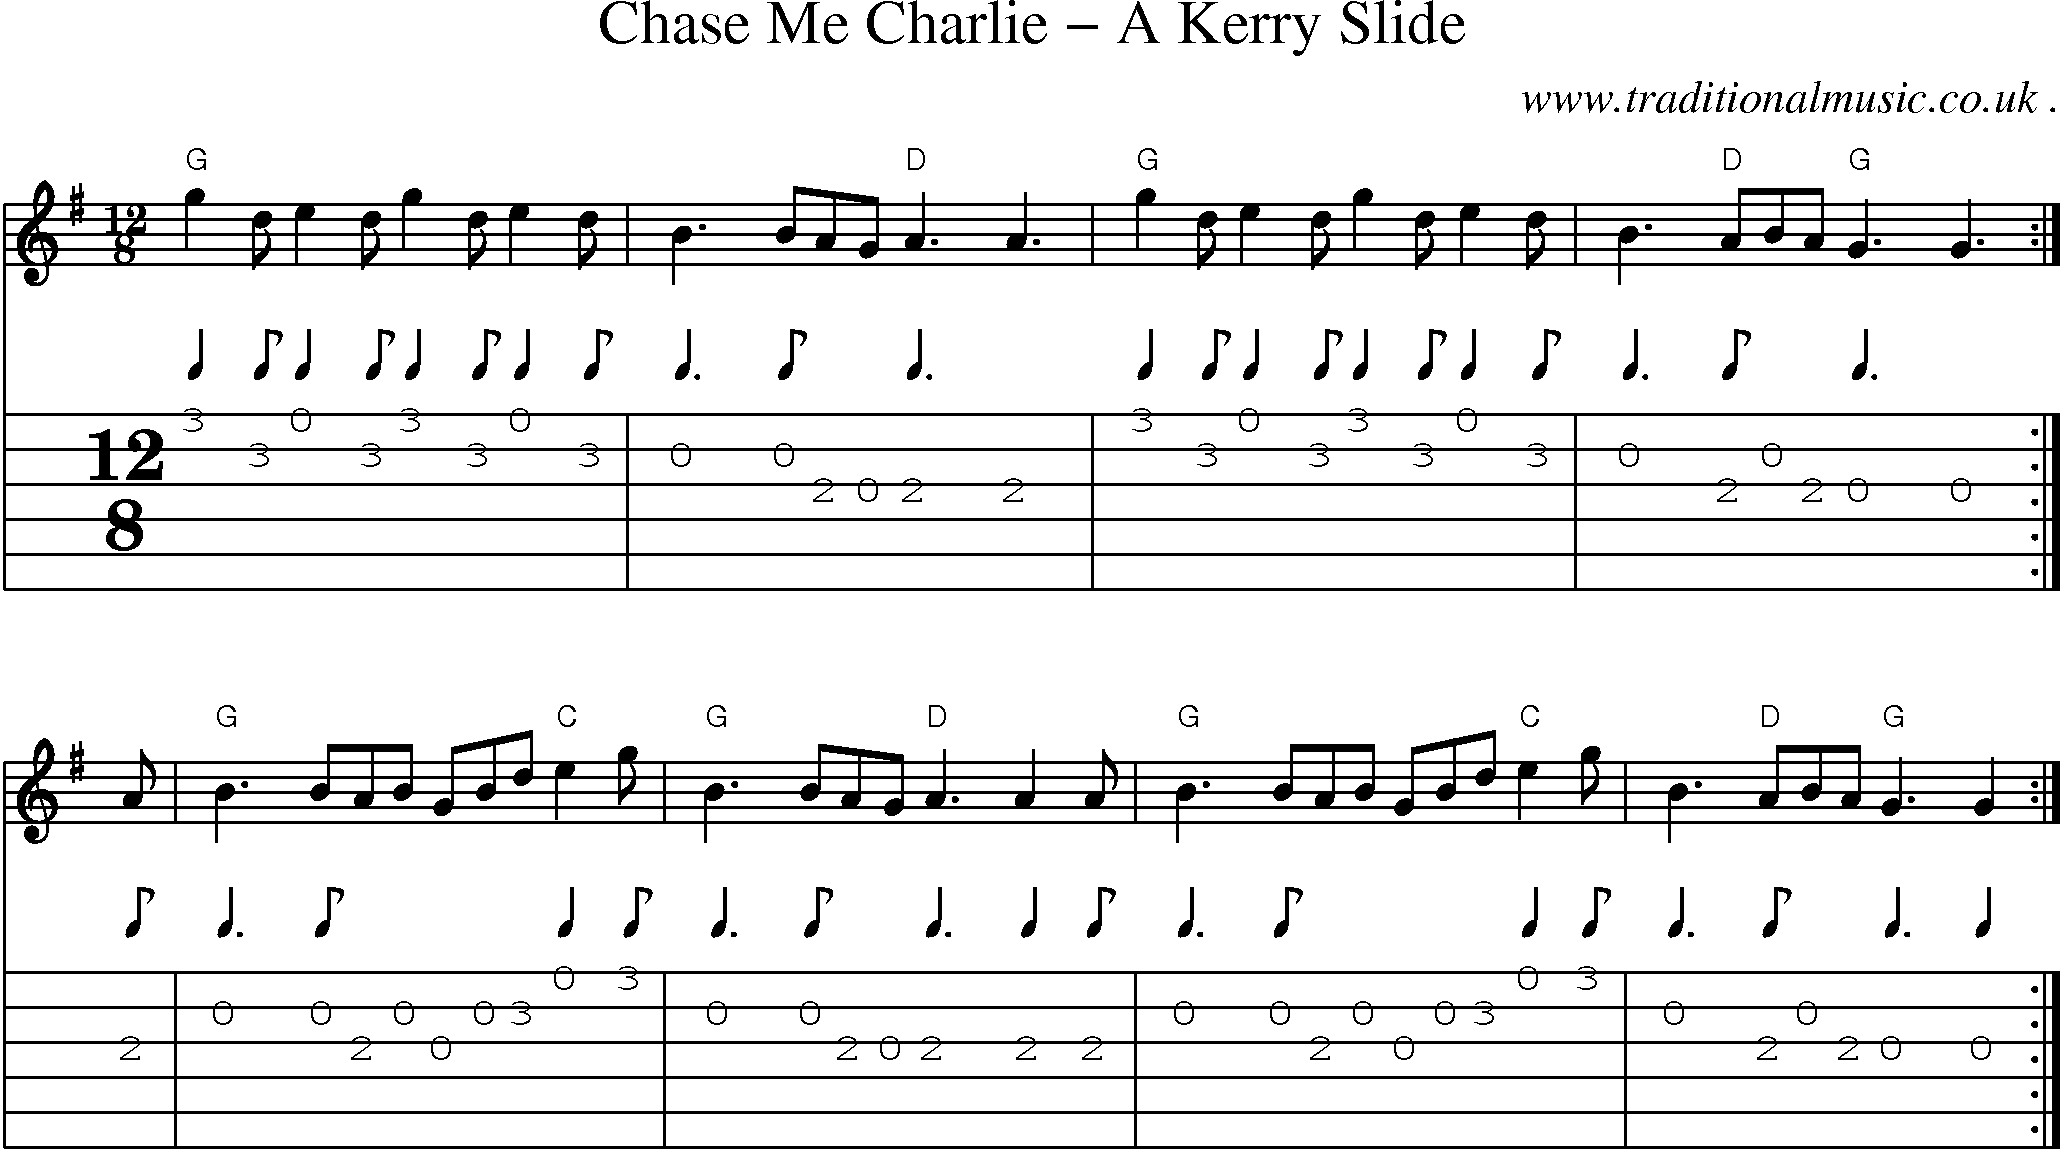 Music Score and Guitar Tabs for Chase Me Charlie A Kerry Slide